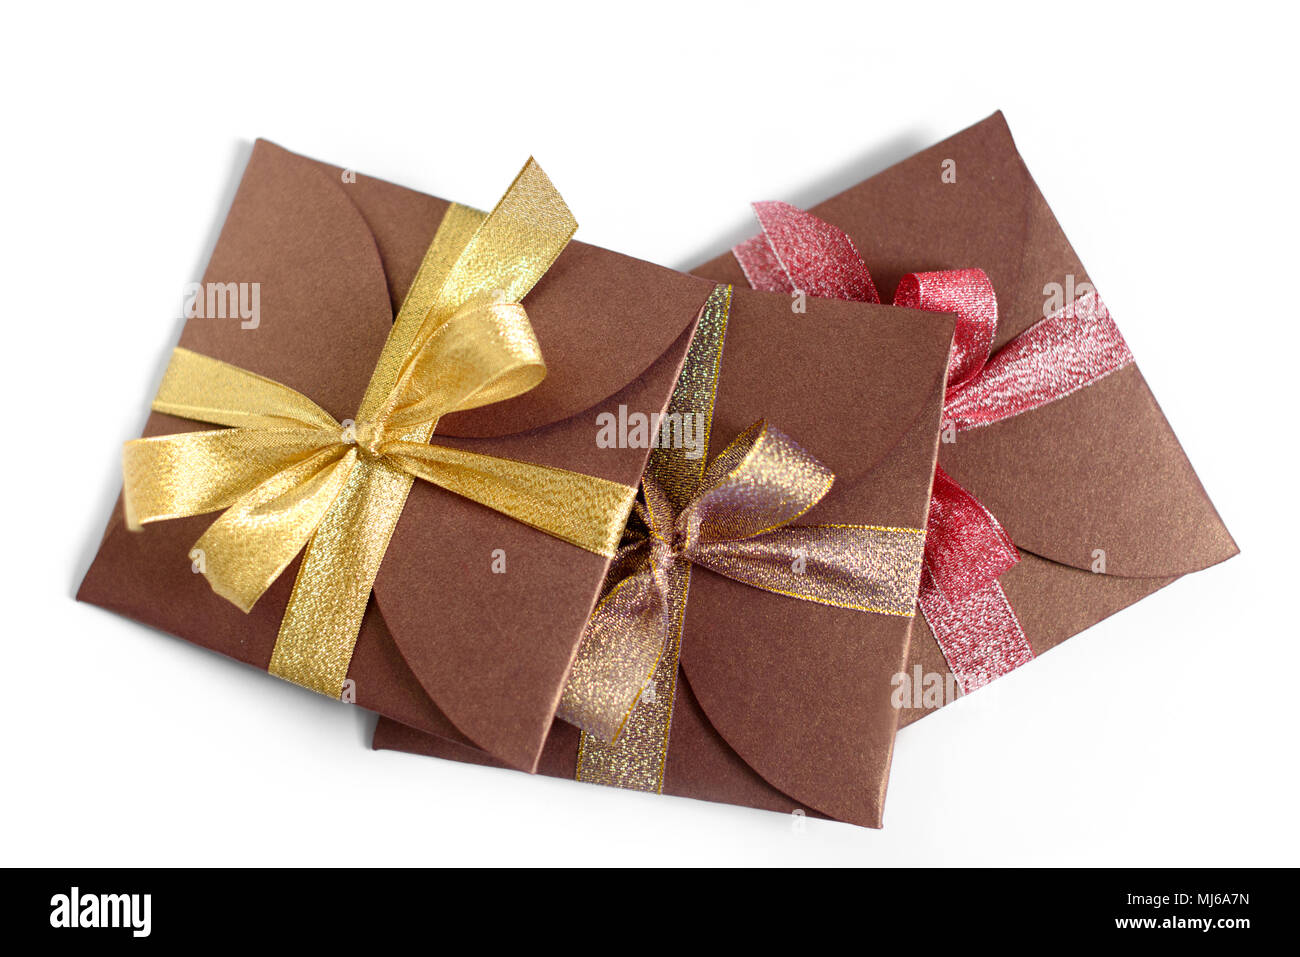 Opened square brown paper gift box and white lid tied up with